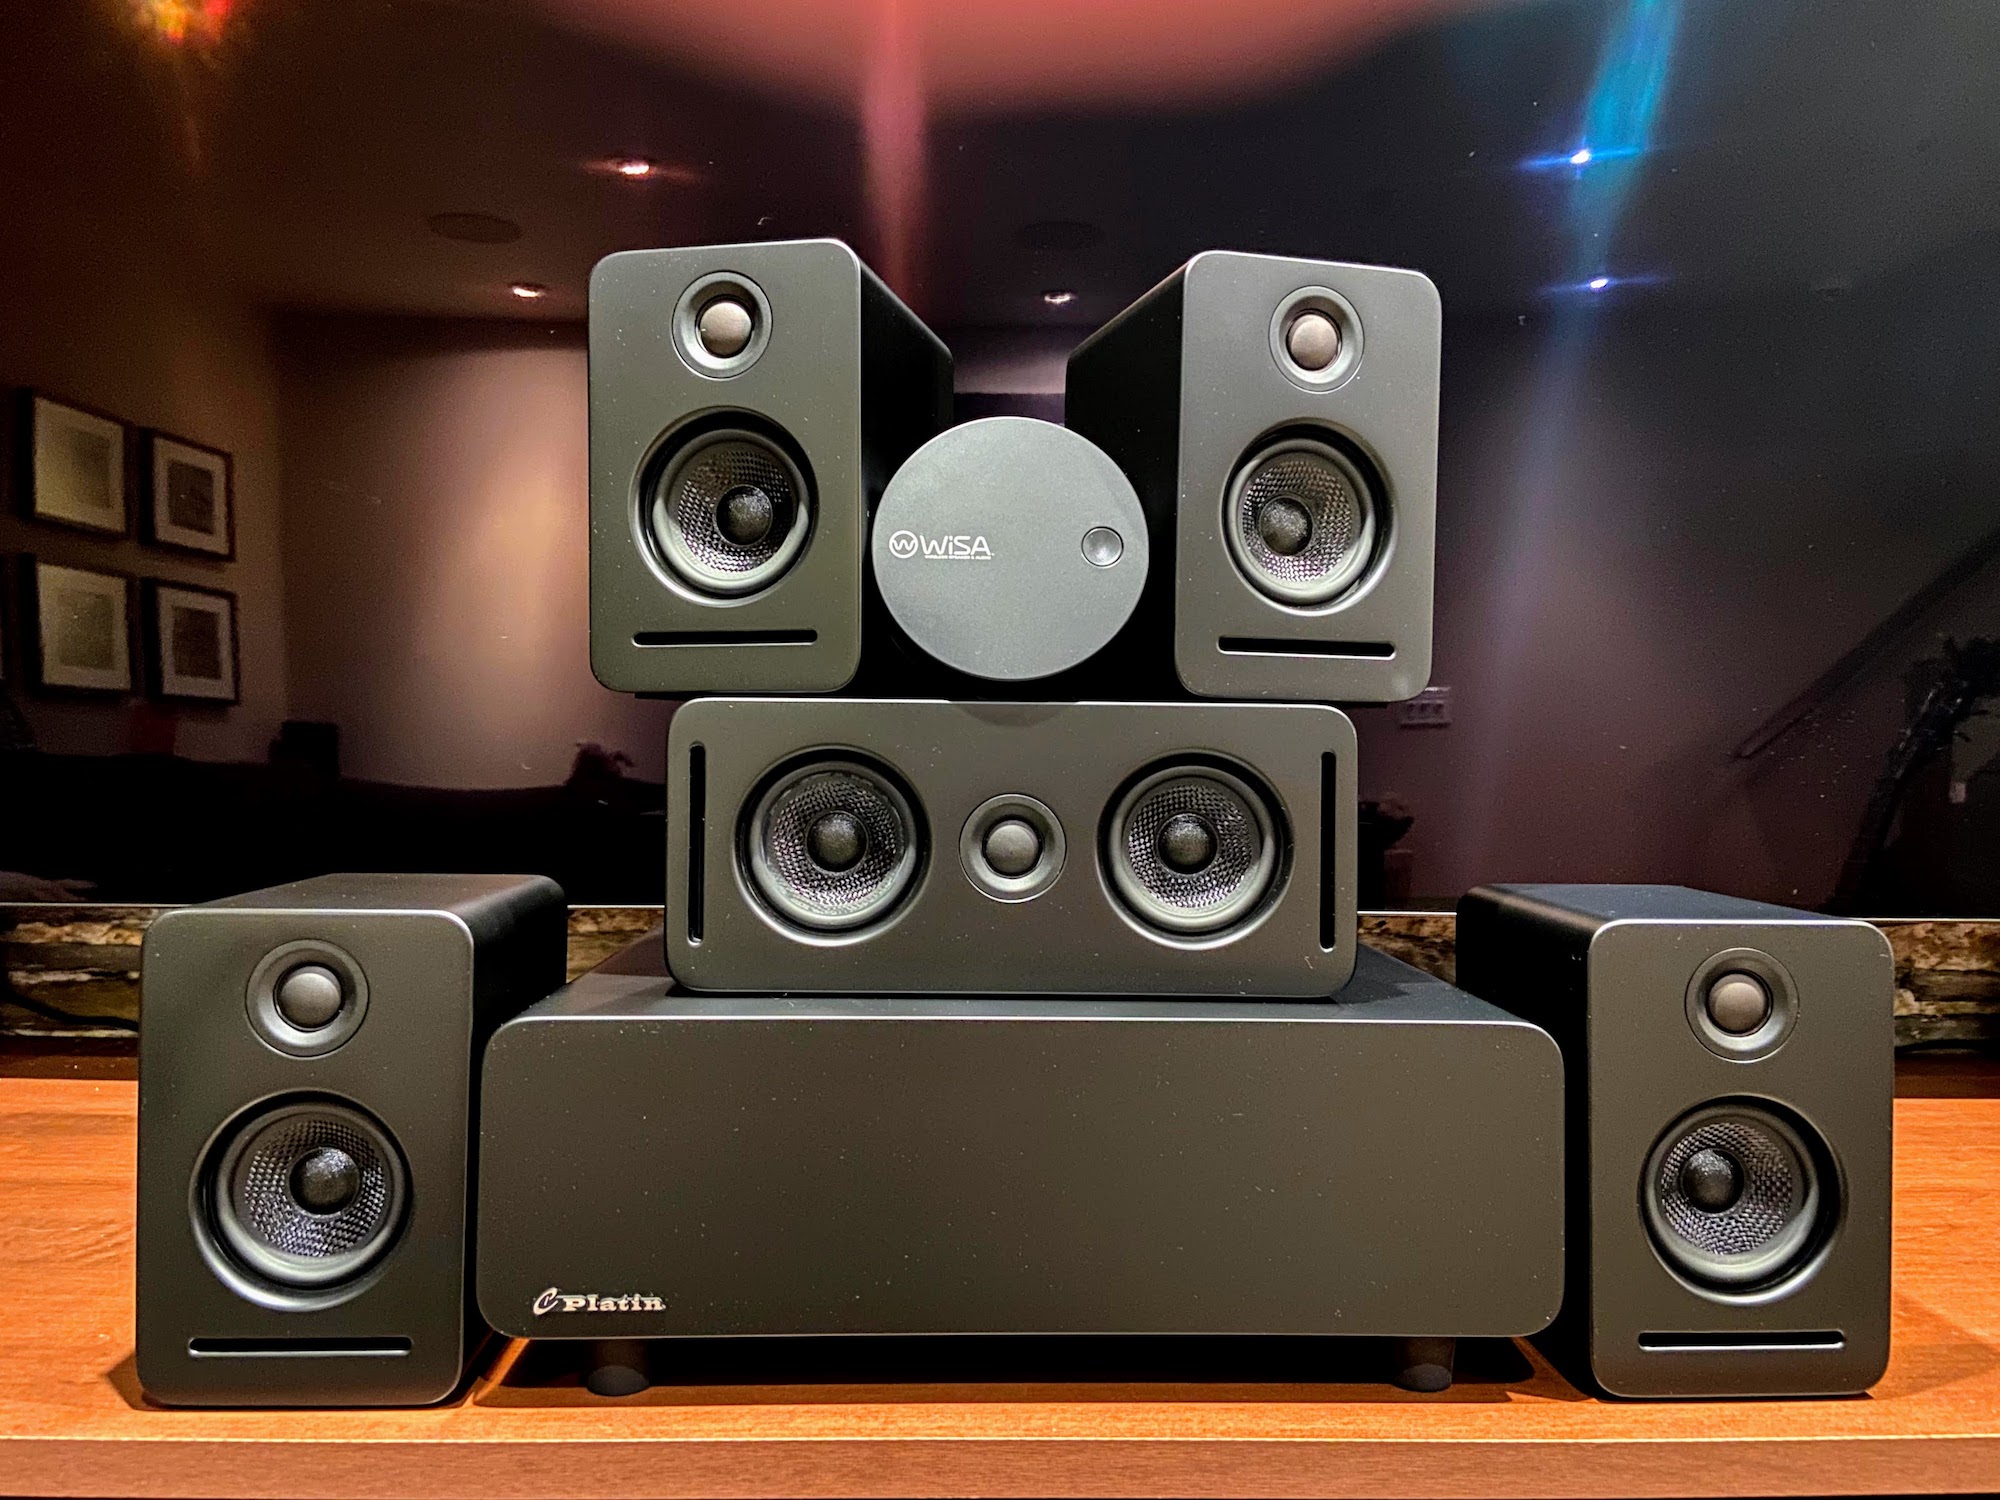 Hands-On With A WiSA 5.1 Home Theater System | Digital Trends